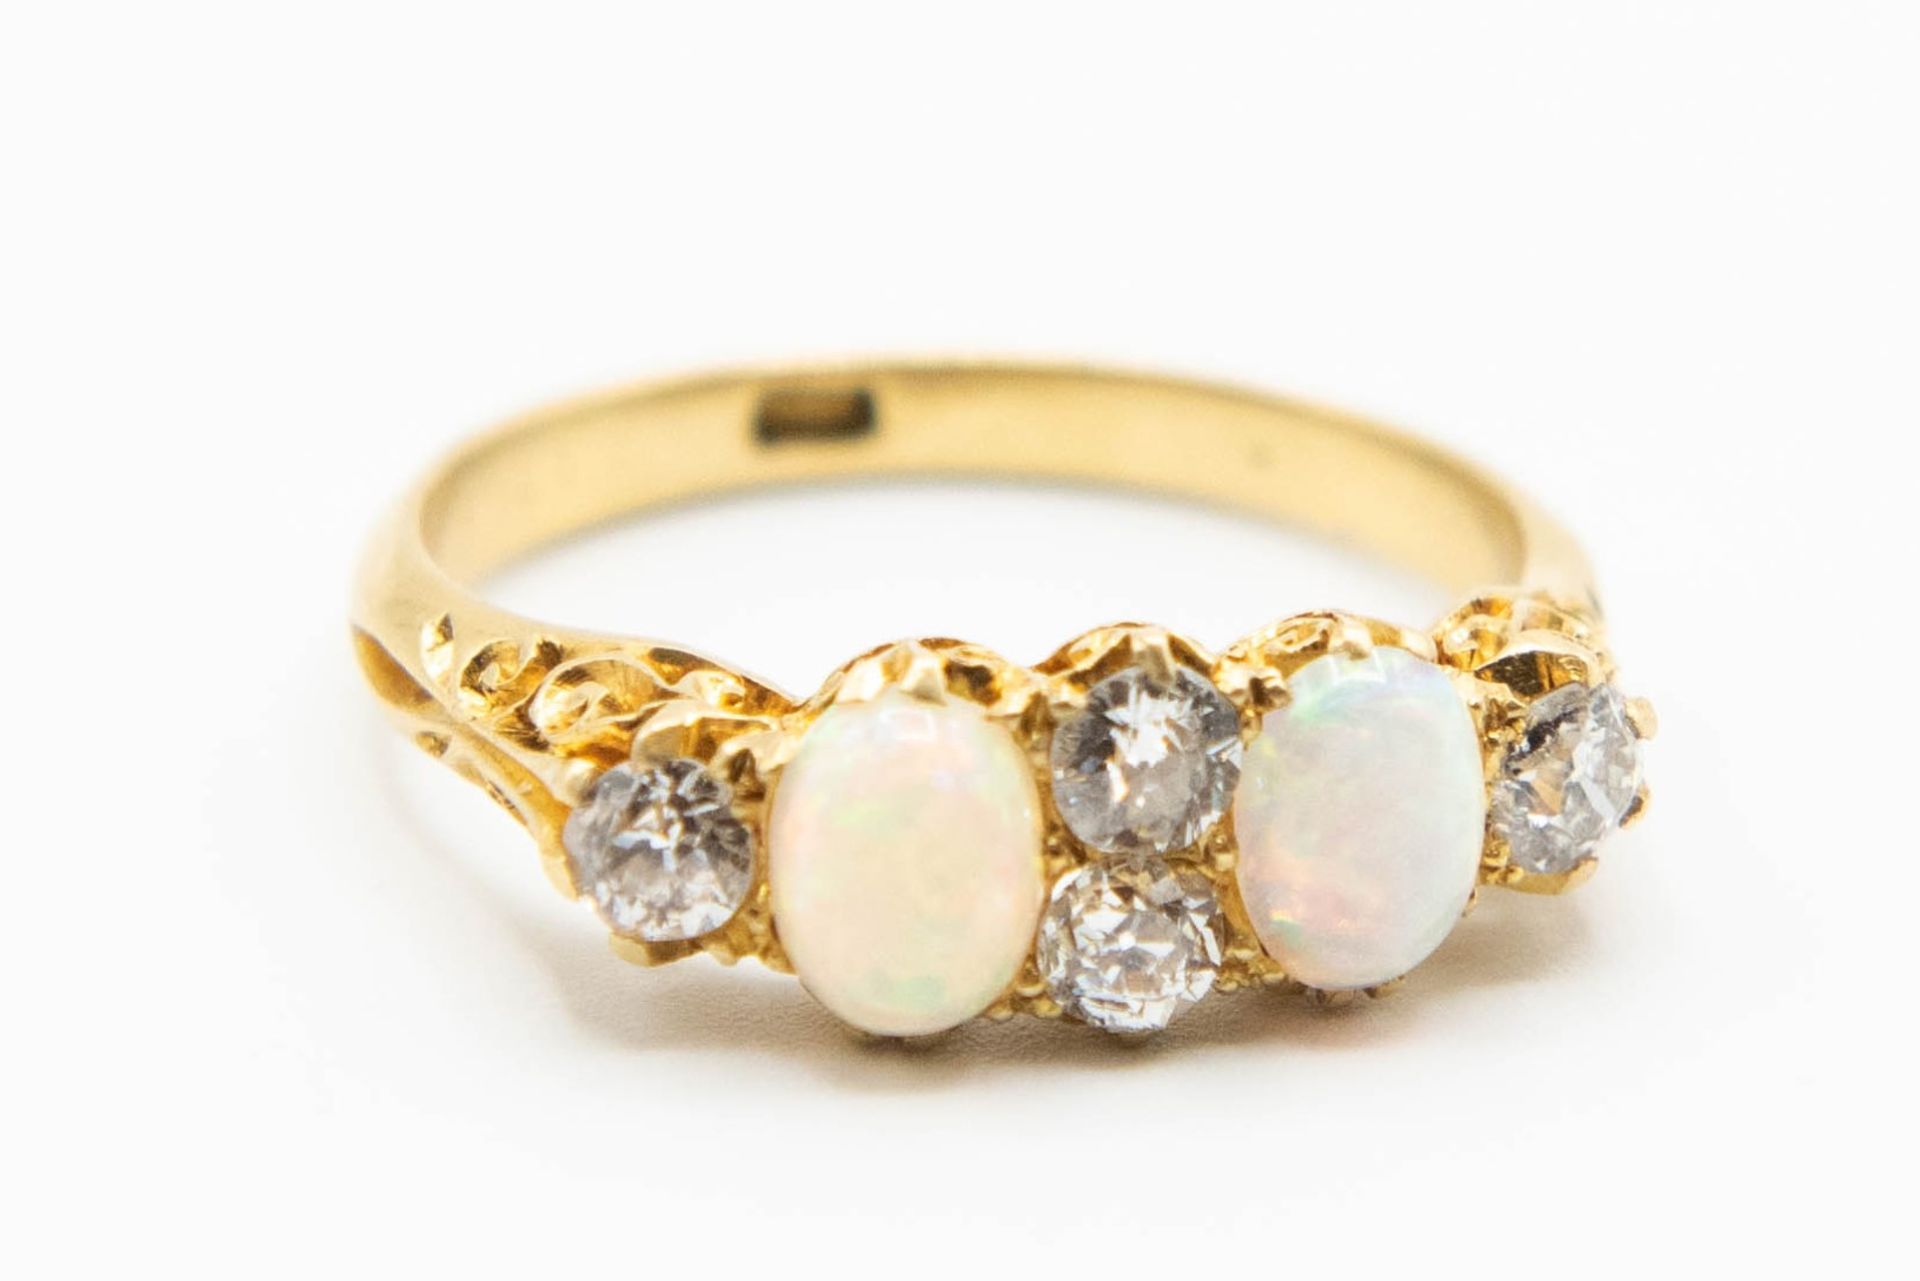 A LATE VICTORIAN 18CT YELLOW GOLD OPAL AND DIAMOND RING